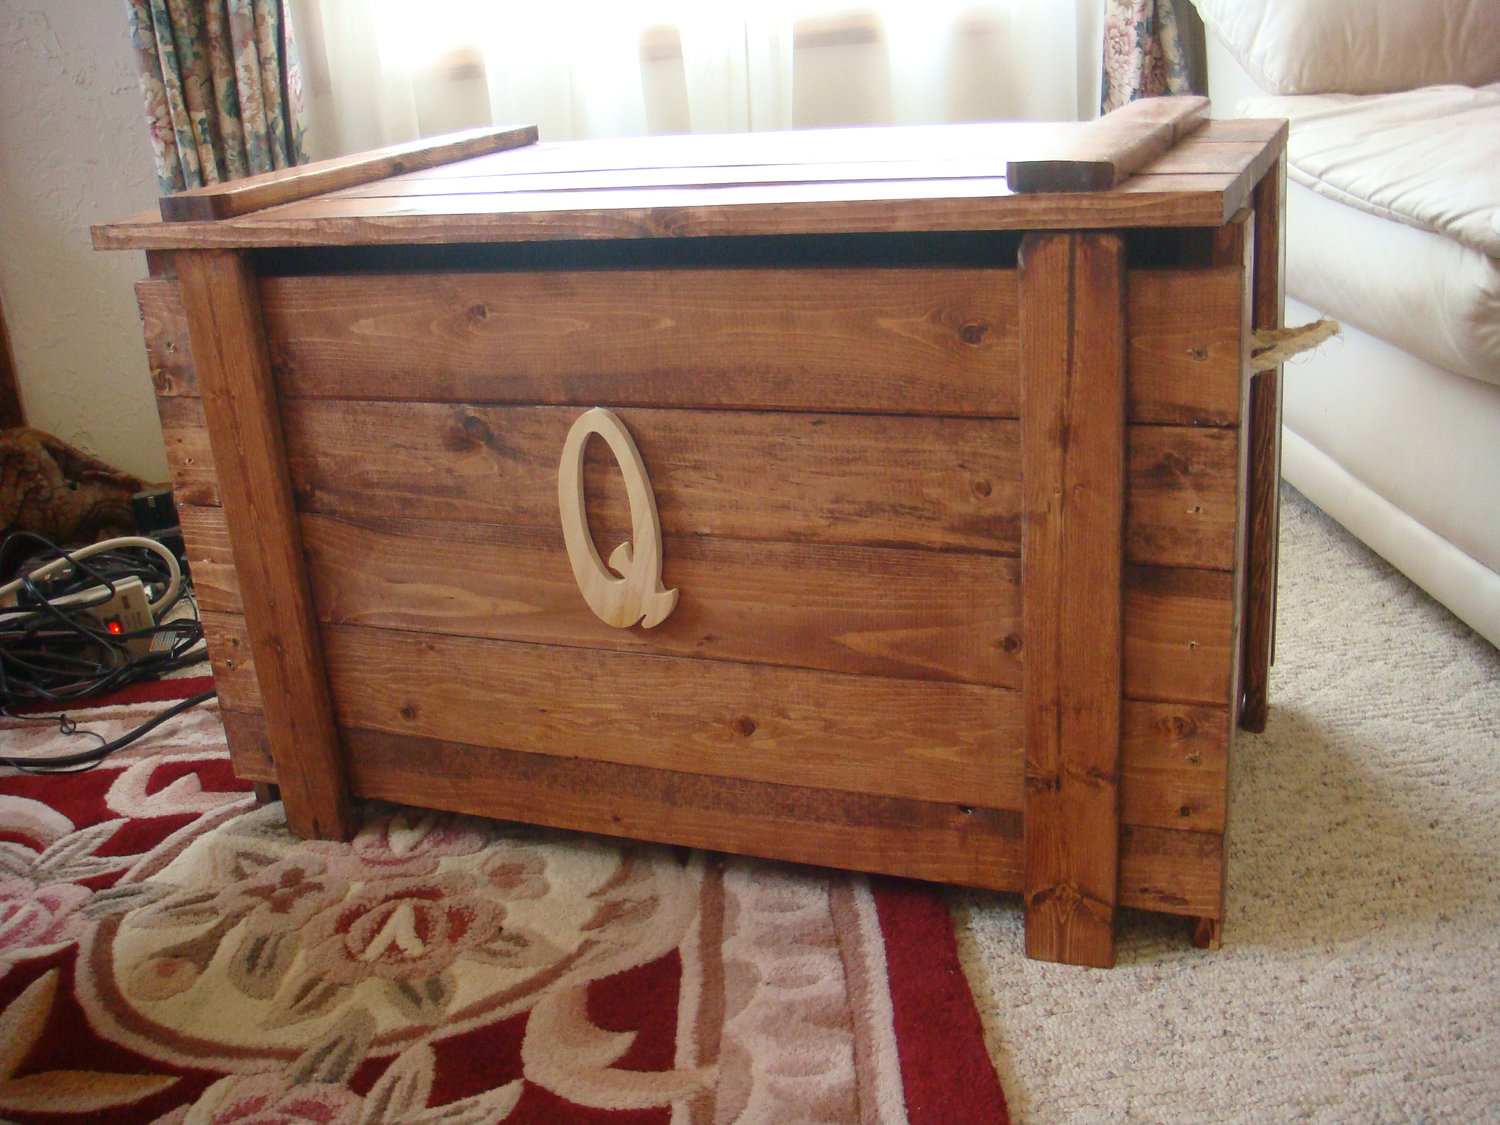 Building a Wooden Toy Box and Why They Are Preferred Over 